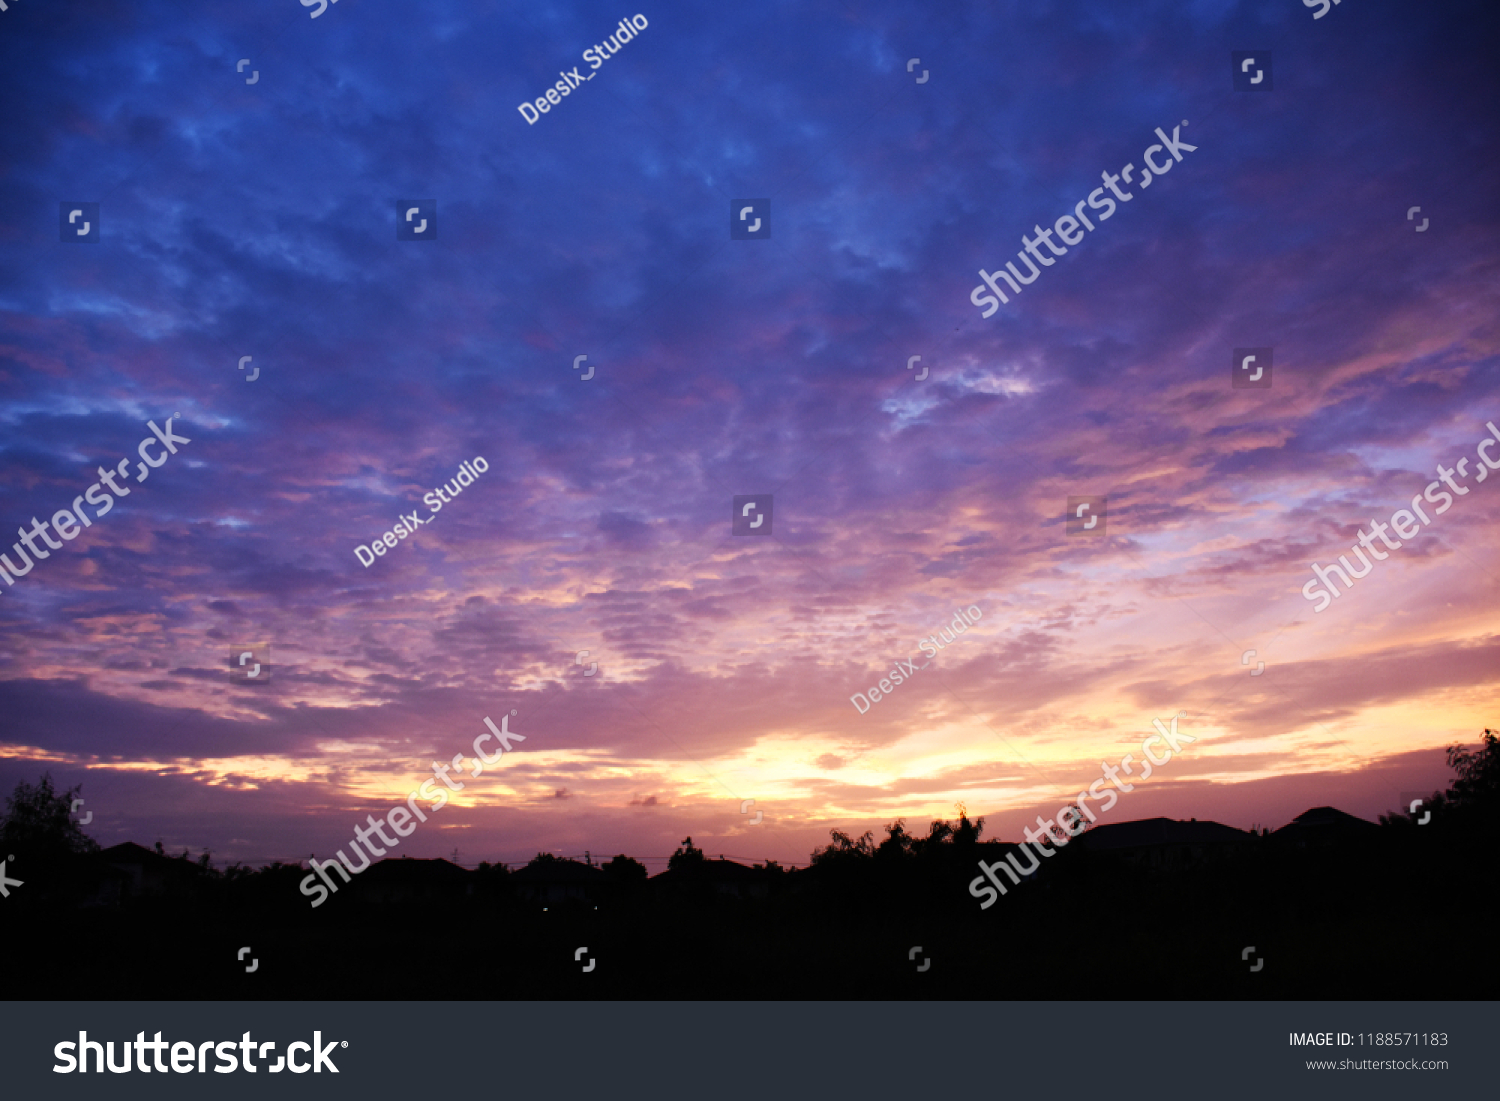 Colorful sky in twilight time background, Twilight sky with cloud #1188571183